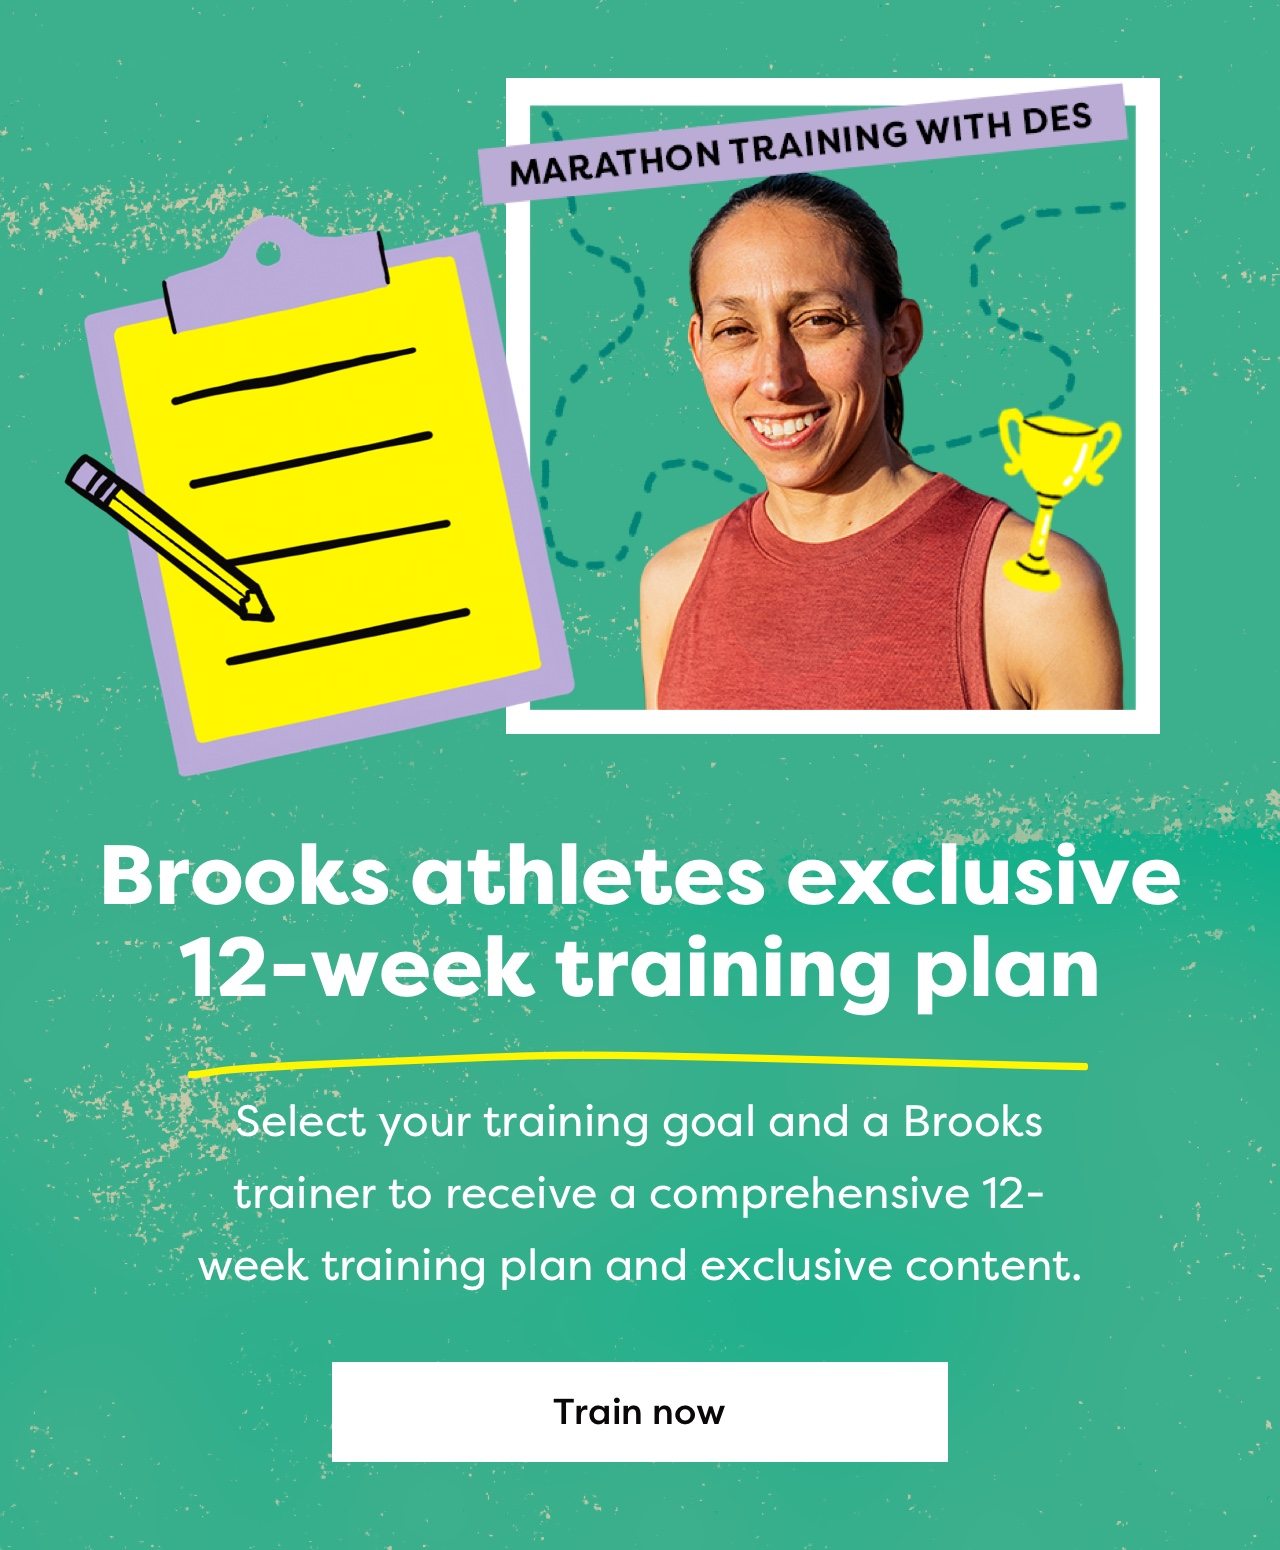 MARATHON TRAINING WITH DES | Brooks athletes exclusive 12-week training plan | Select your training goal and a Brooks trainer to receive a comprehensive 12-week training plan and exclusive content. | Train now